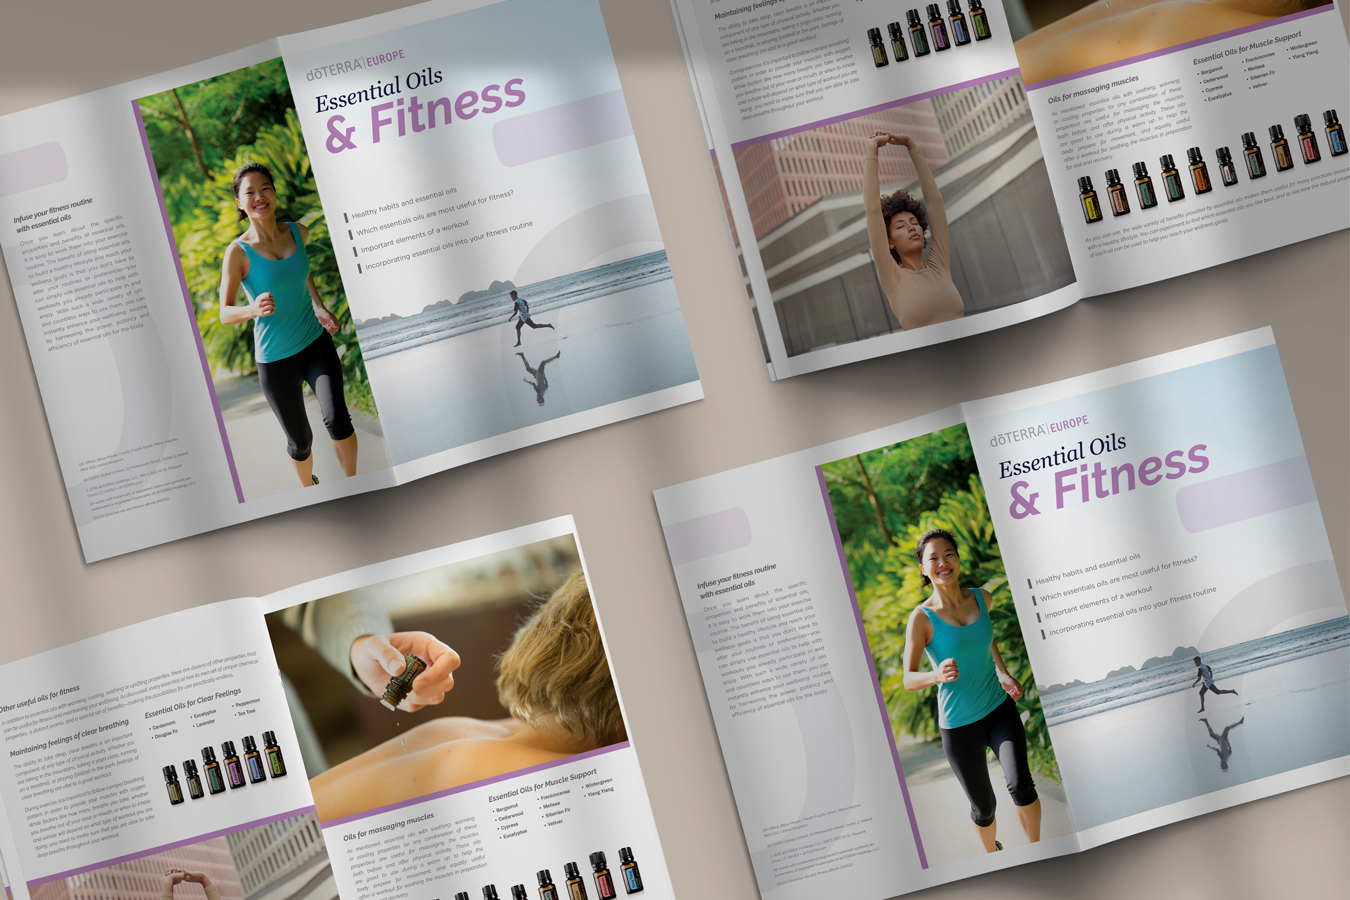 Essential oils and Fitness magazine